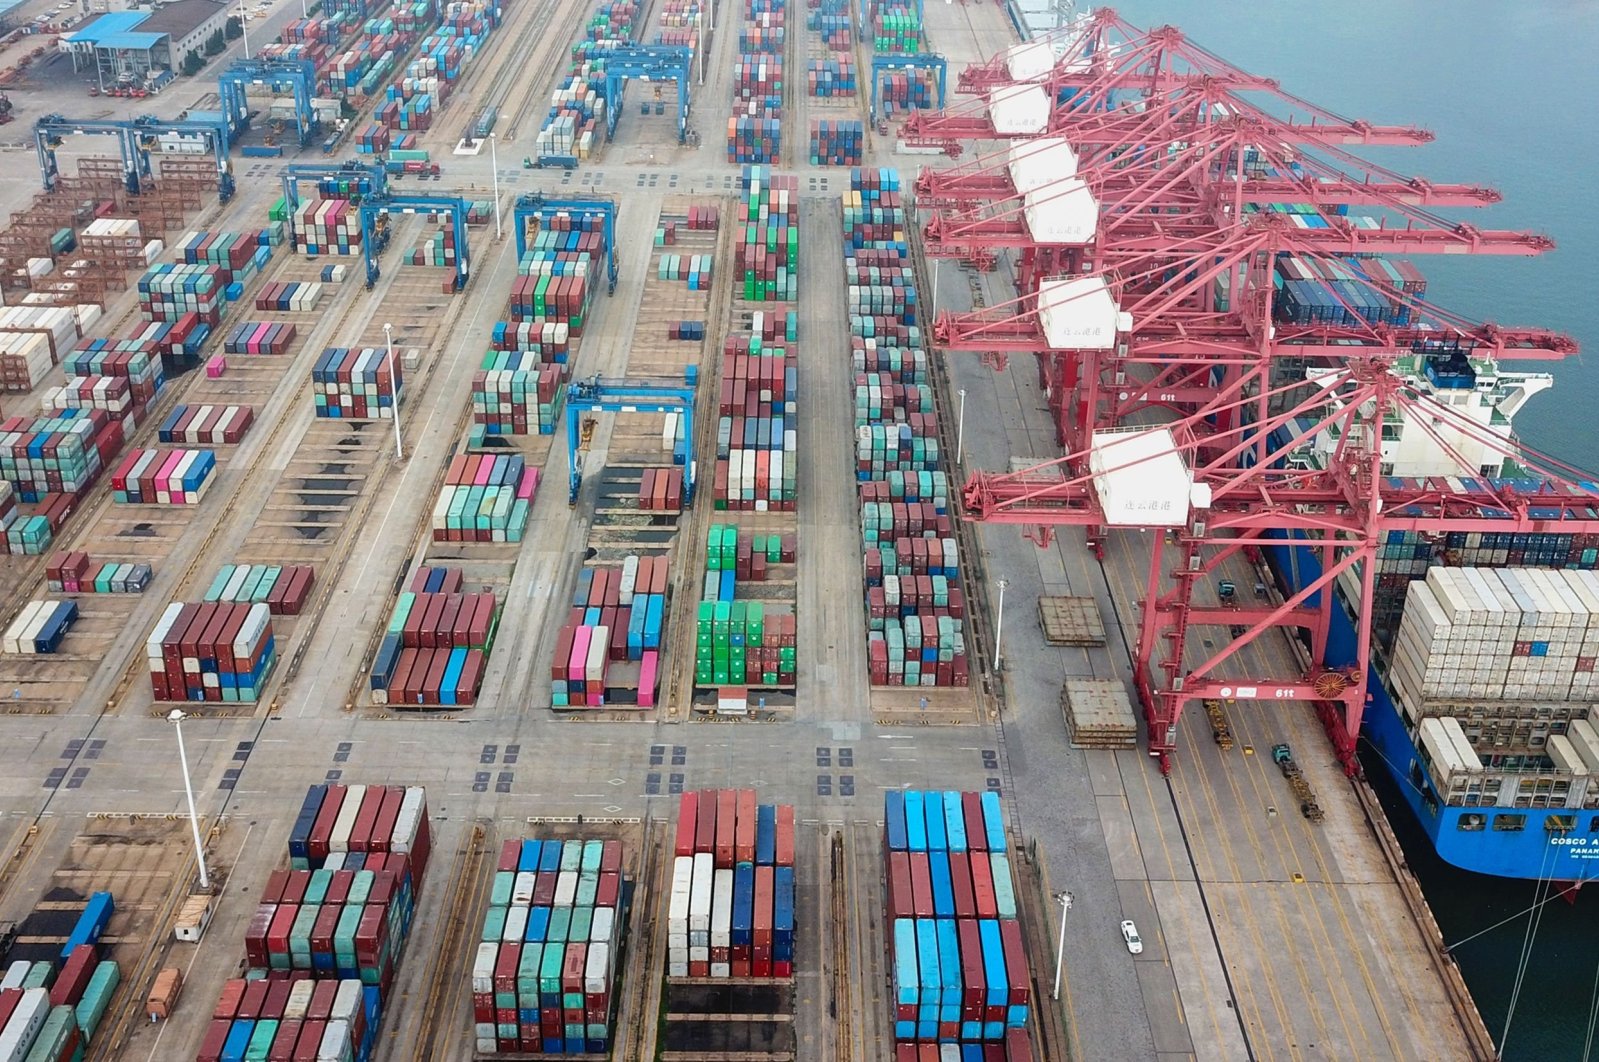 Containers stacked at a port in Lianyungang in China's eastern Jiangsu province, July 14, 2020. (AFP Photo)